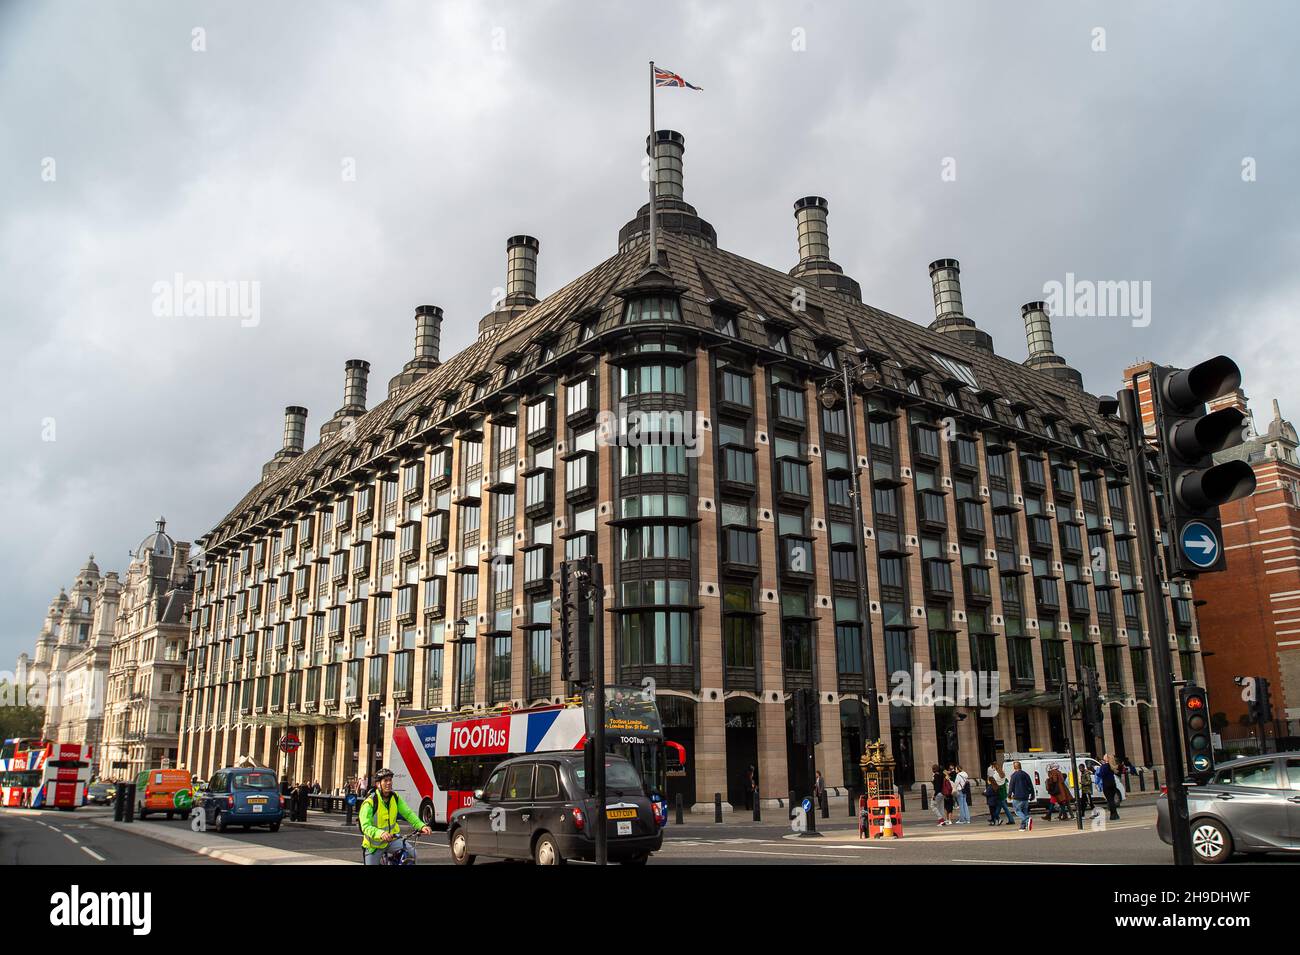 Westminster, London, UK. 19th October, 2021. Portcullis House part of the Palace of Westminster where Members of Parliament hold their meetings. Credit: Maureen McLean/Alamy Stock Photo